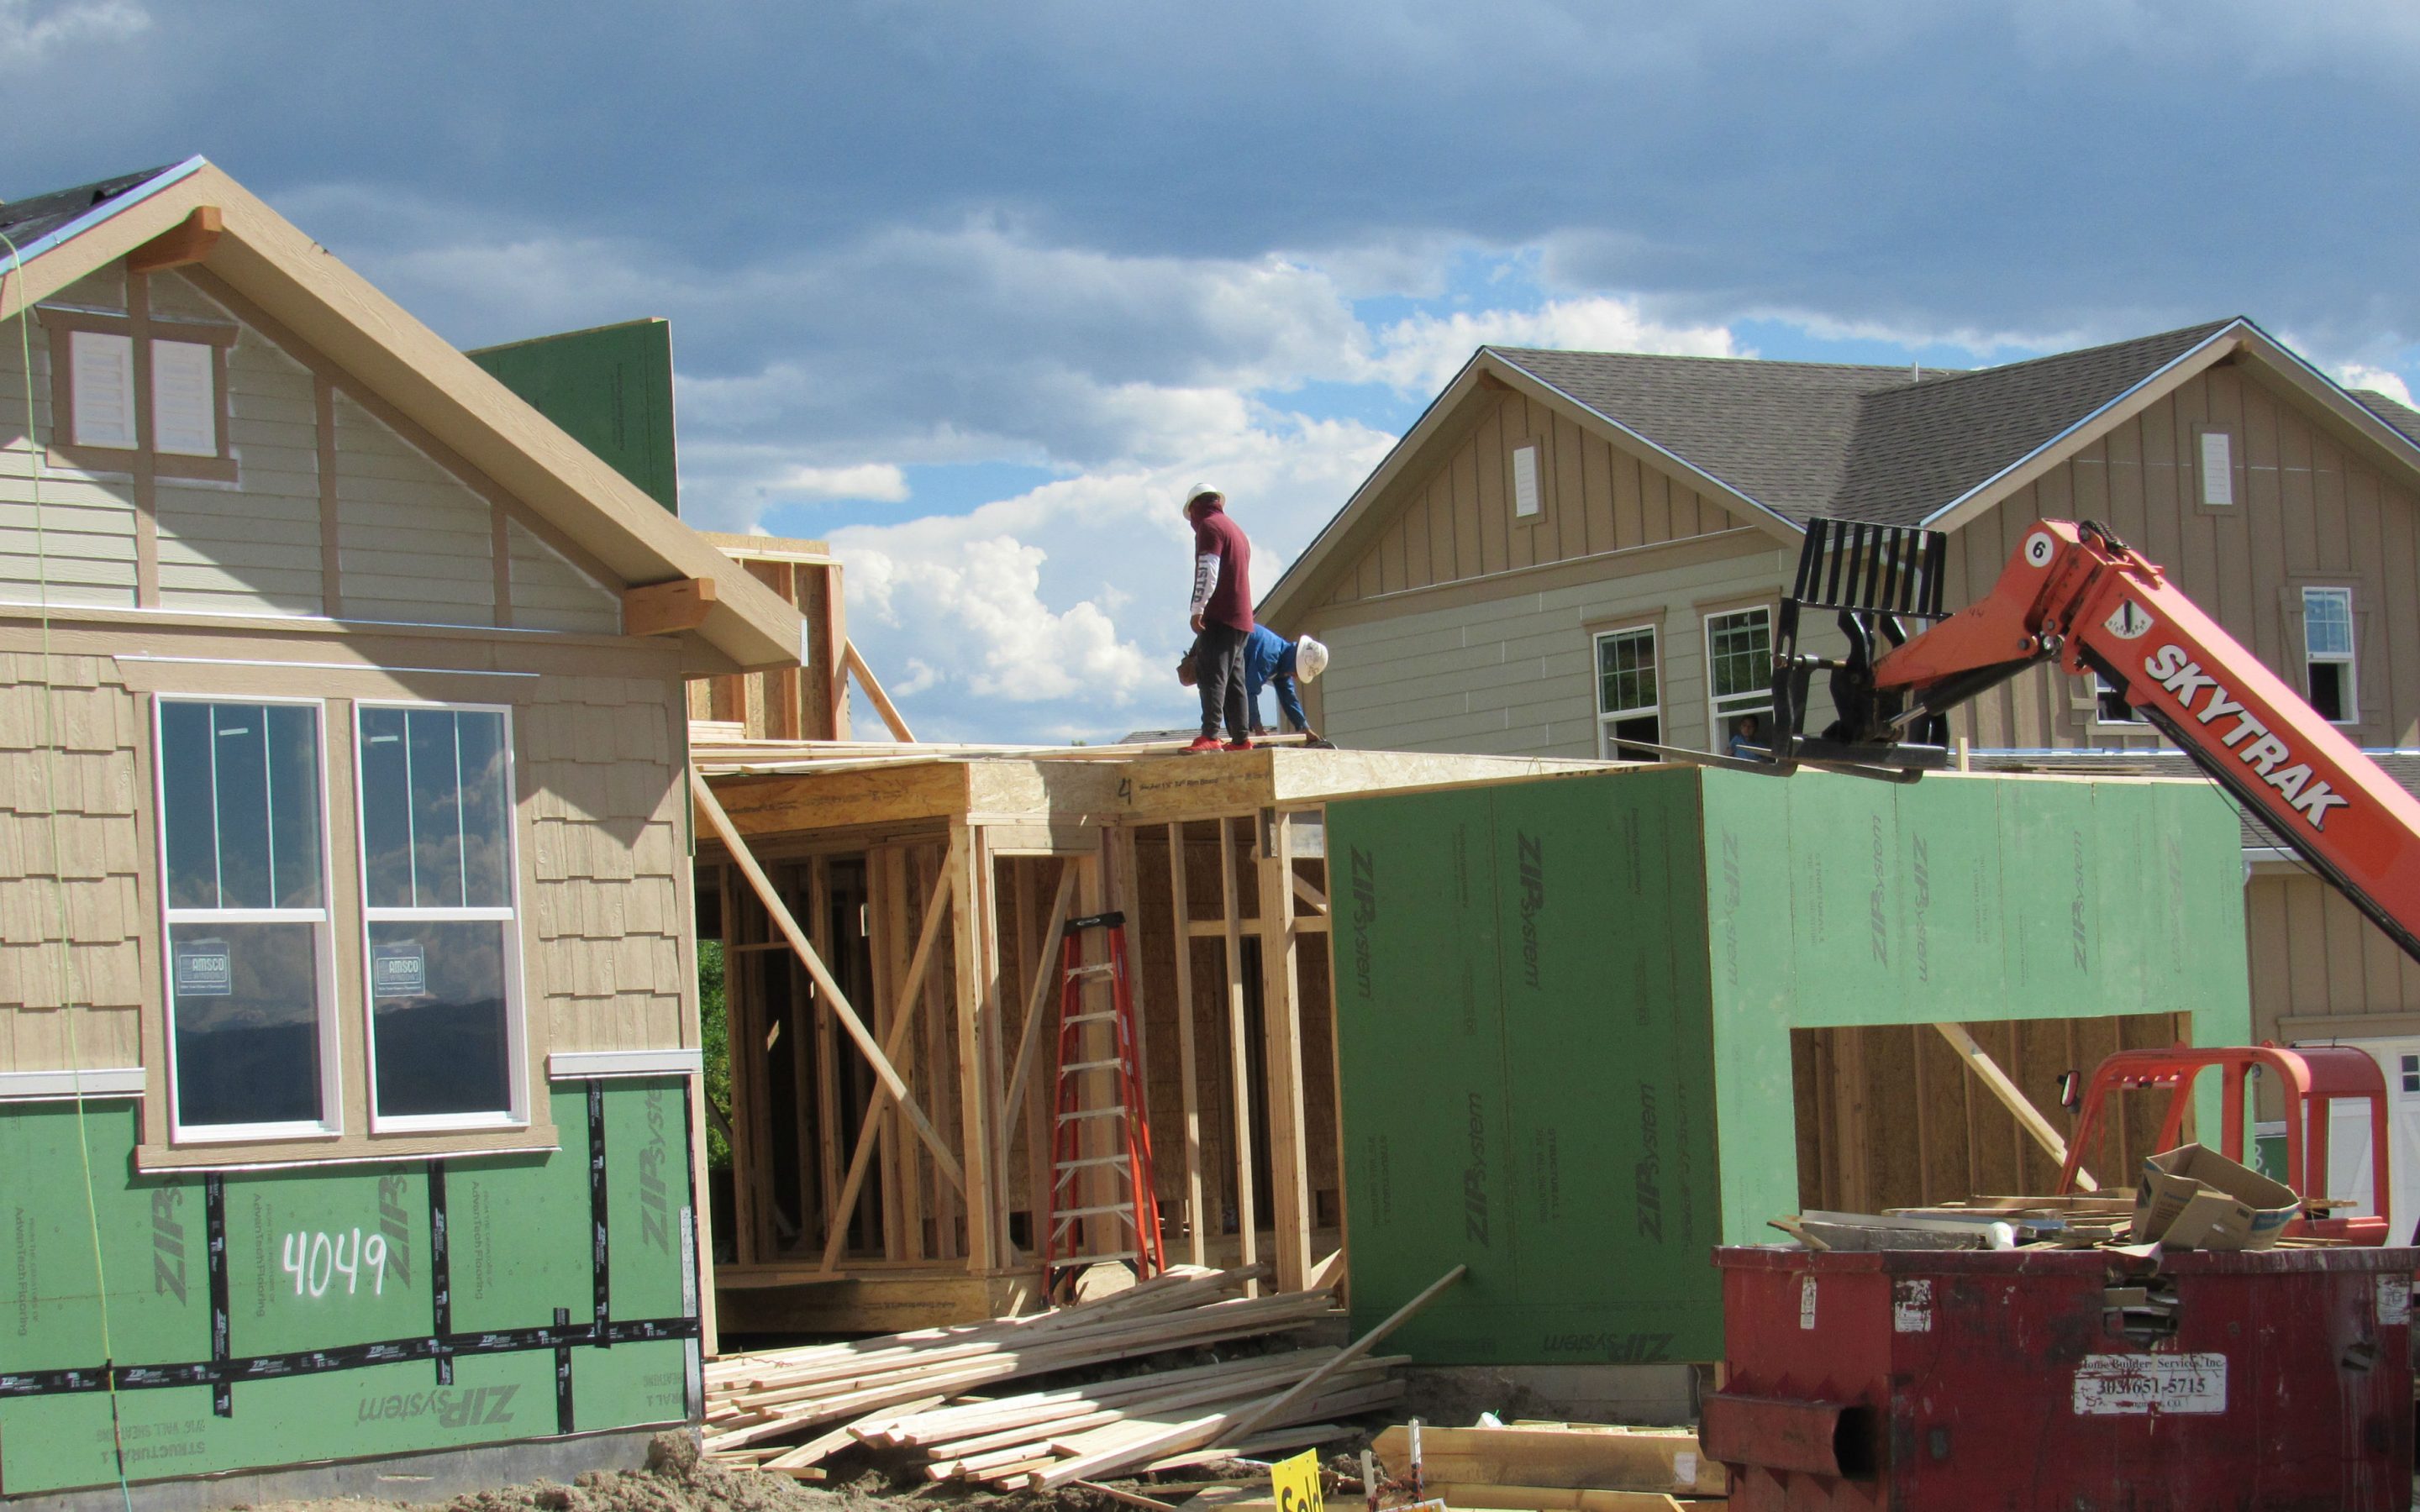 Construction workers build a single family home in Castle Rock. The needs new surface water supplies to reduce its reliance on non-renewable groundwater. Credit: Jerd Smith